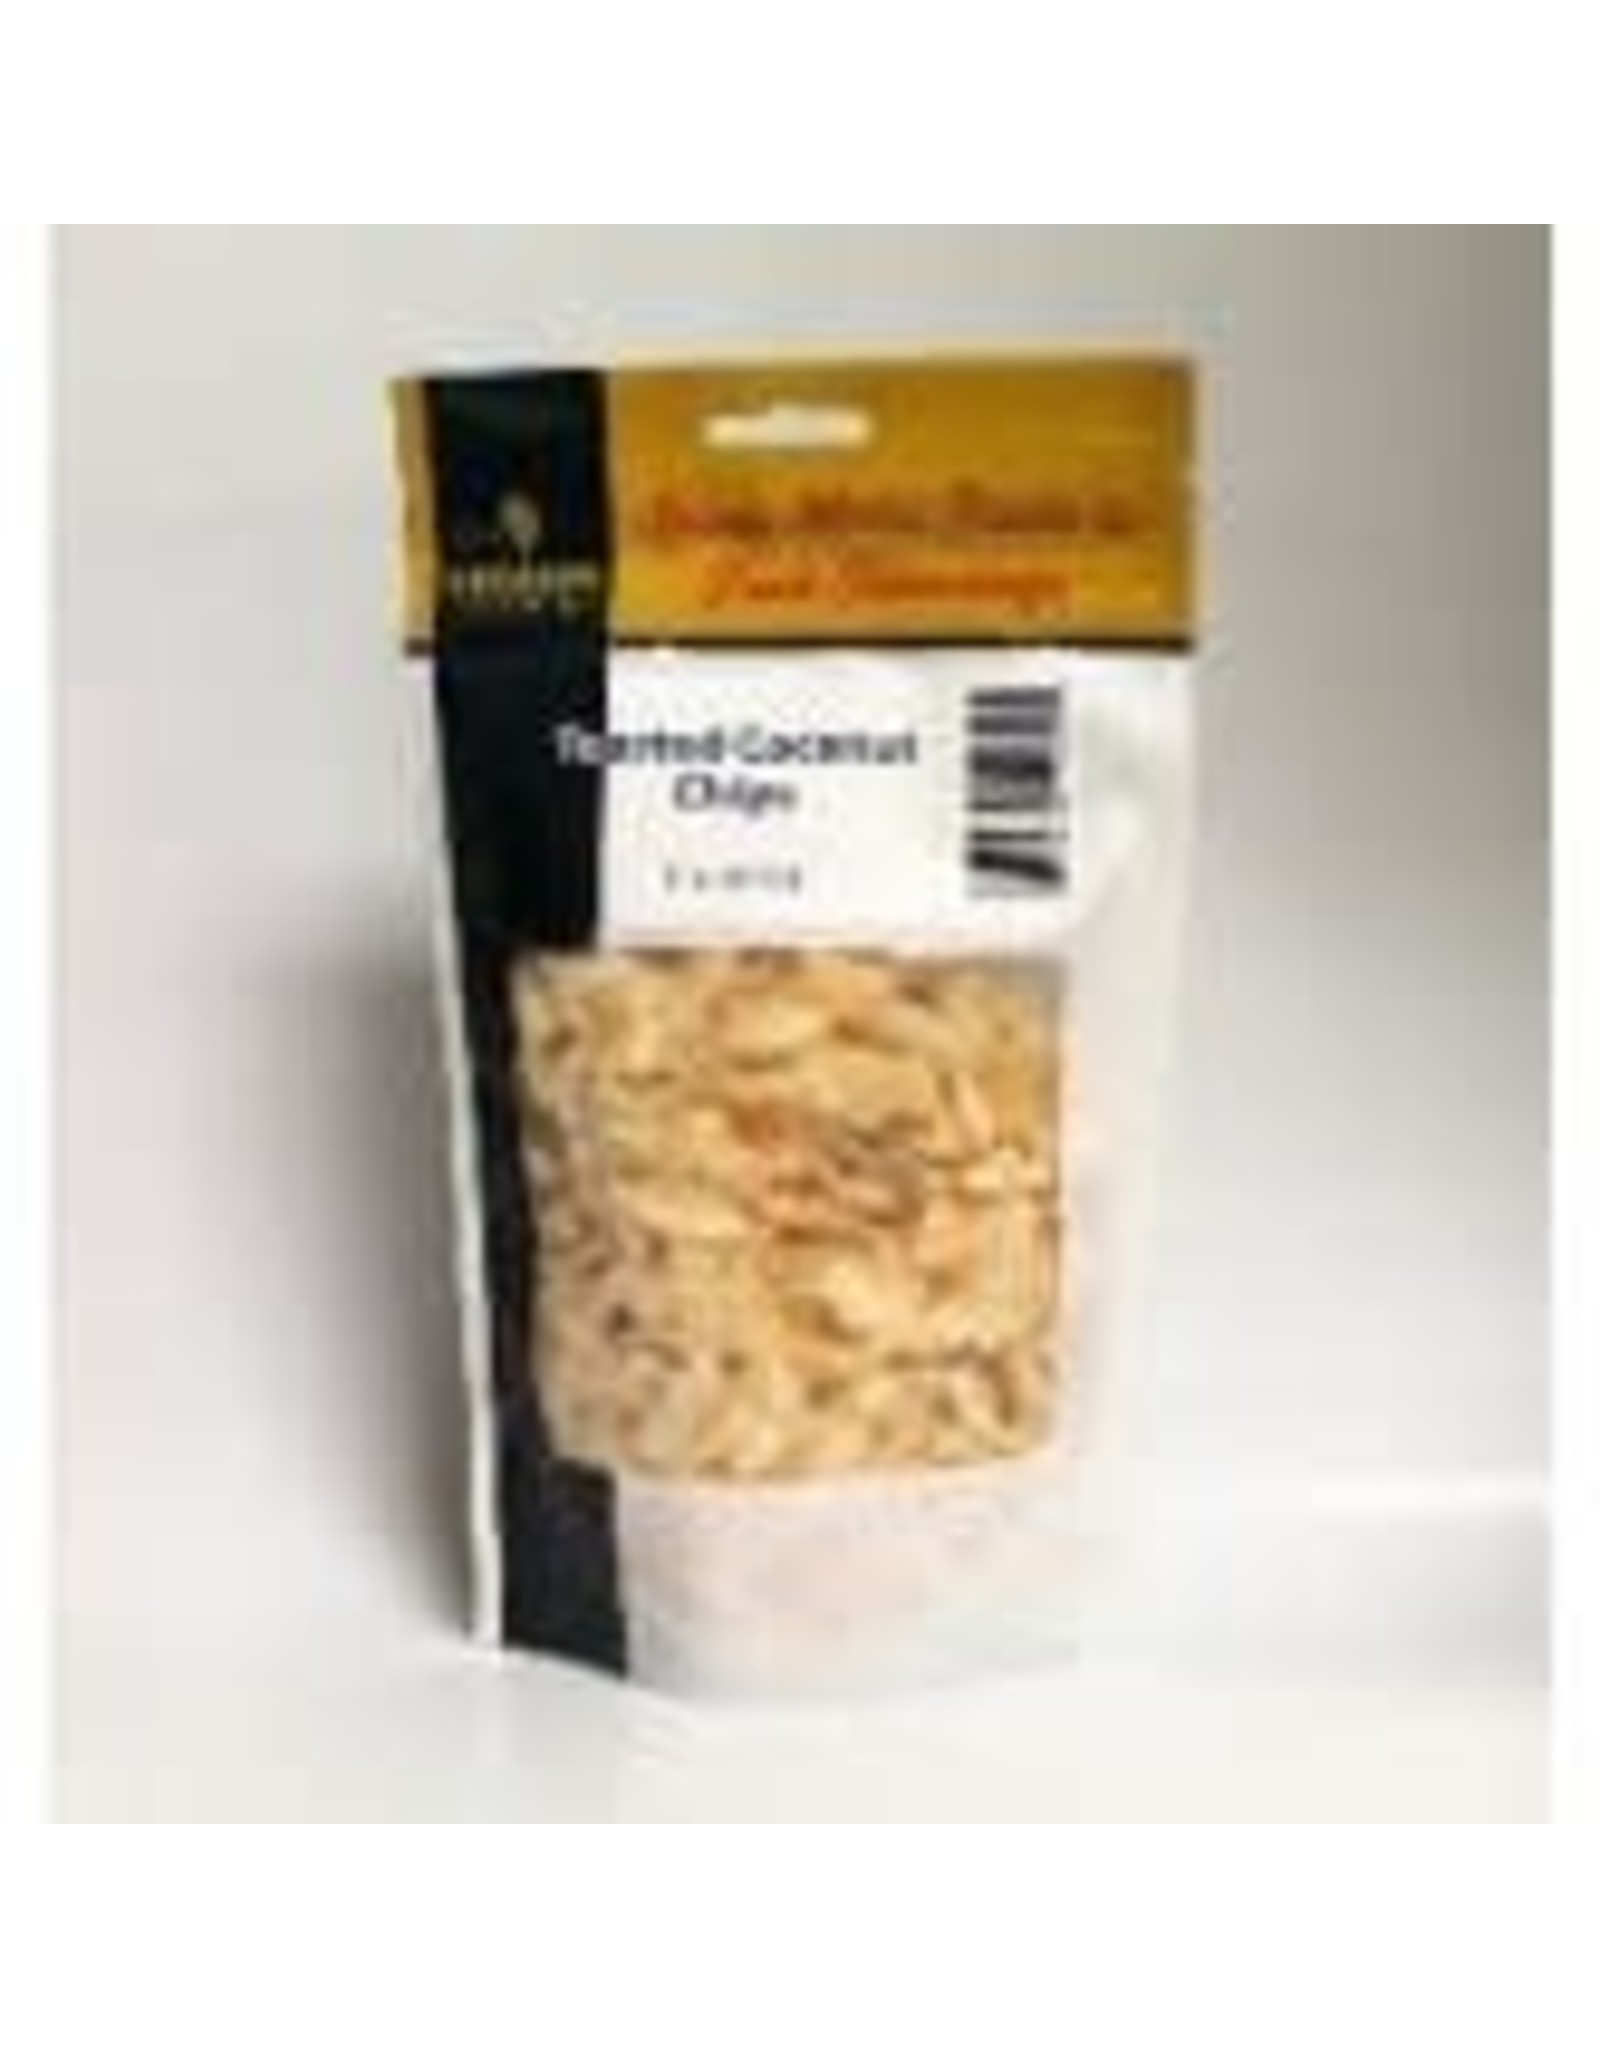 BREWERS BEST TOASTED COCONUT CHIPS 4 OZ